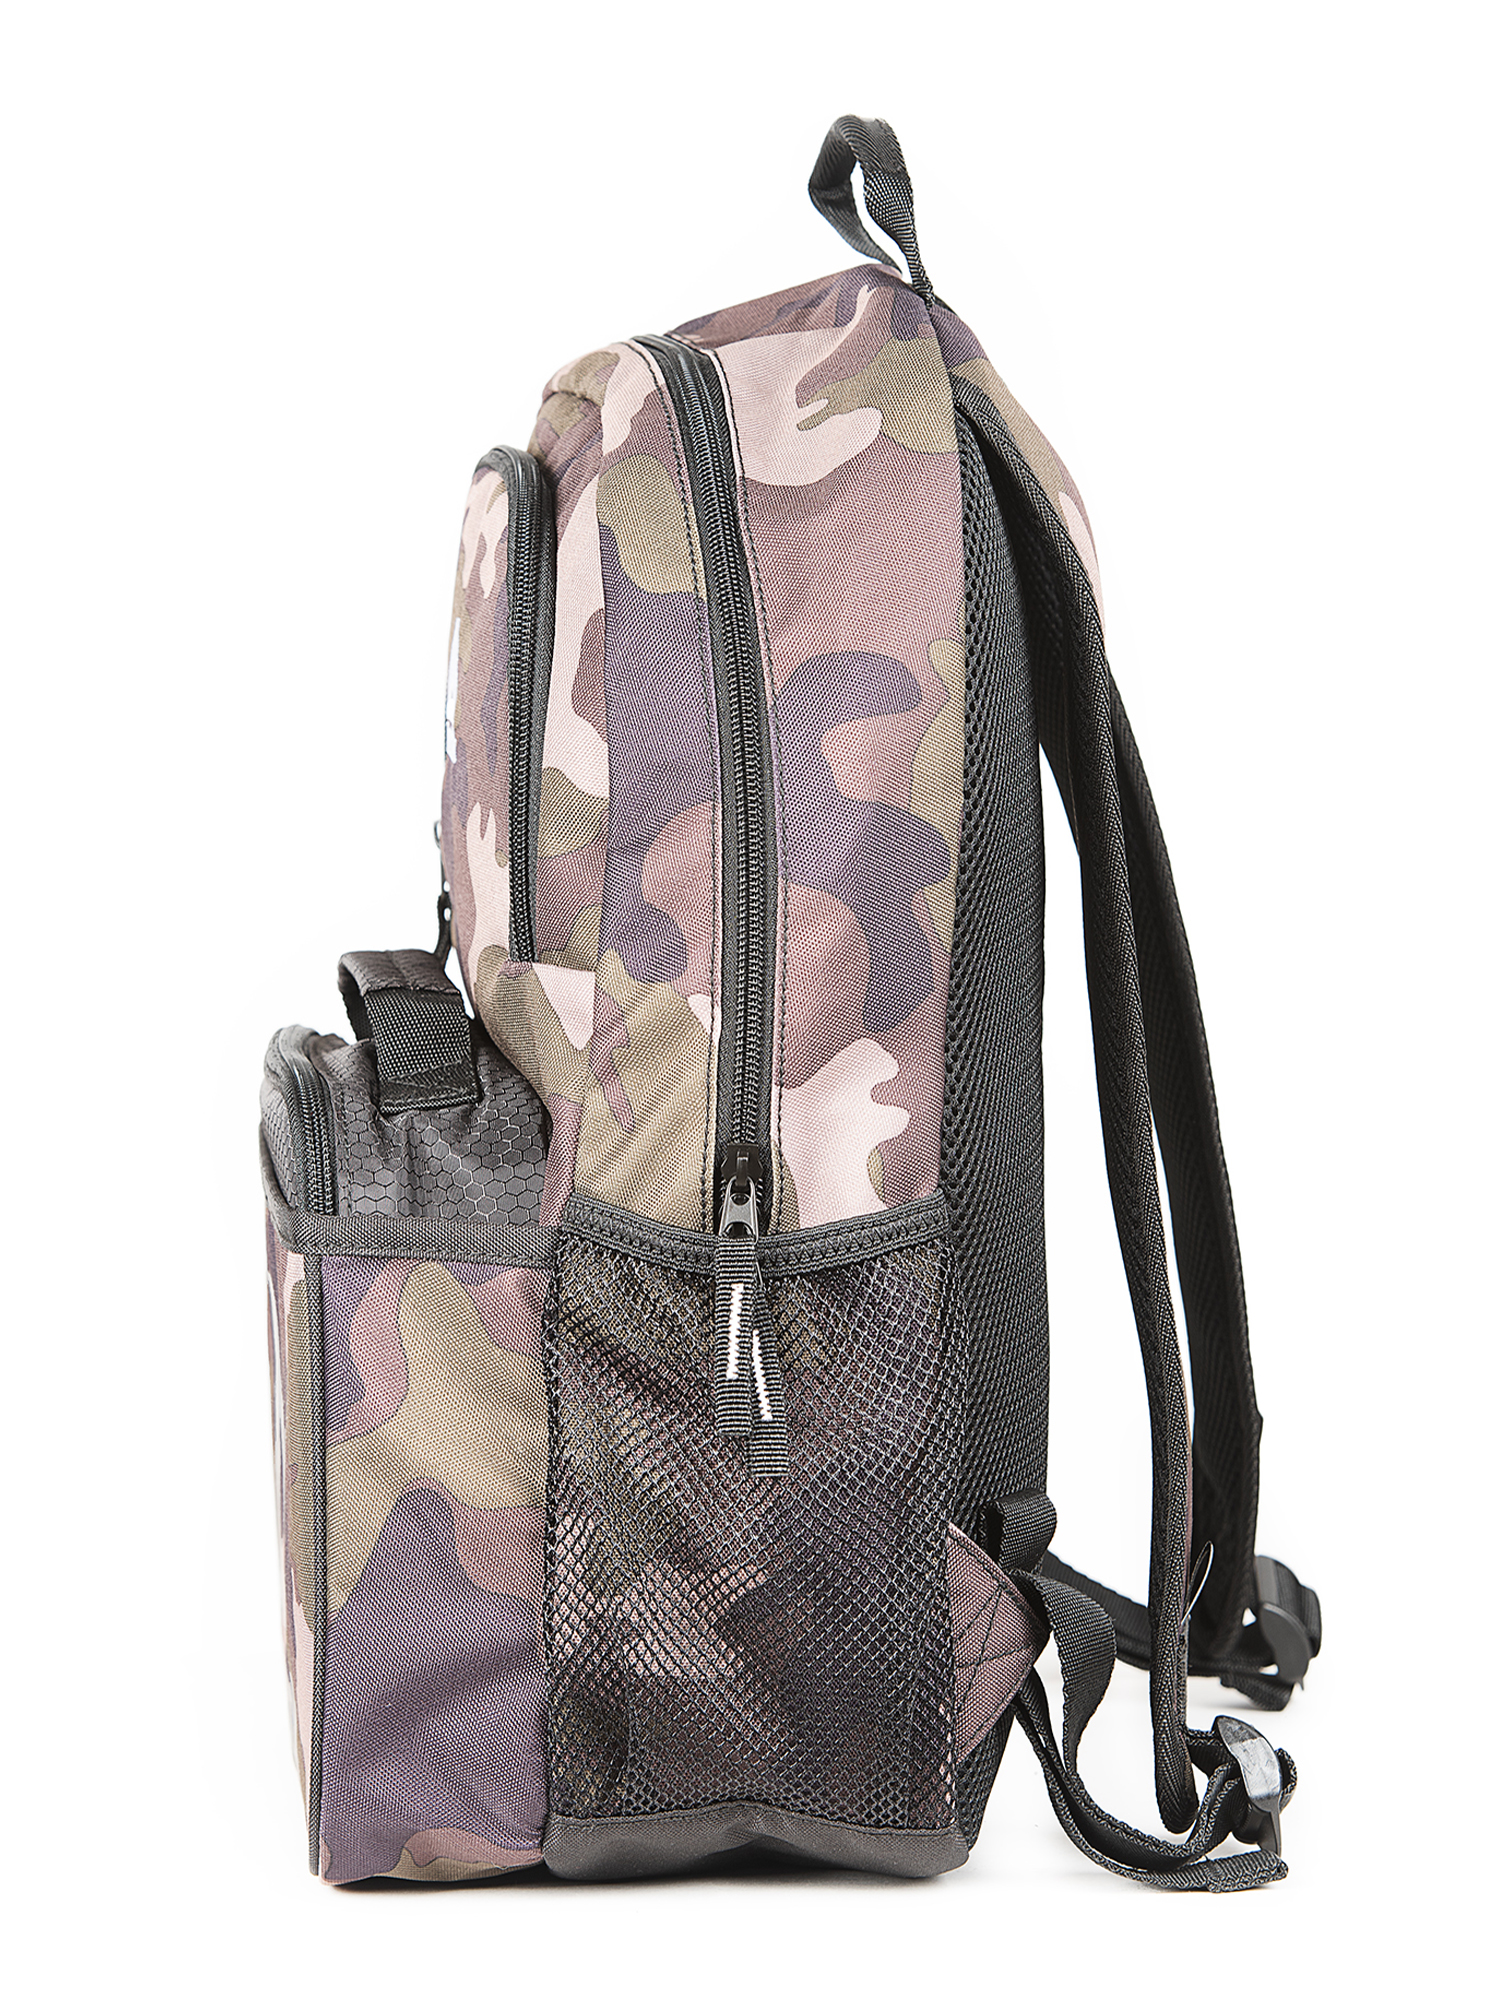 Reebok Unisex Riley Backpack with Lunch Box - Army Camo - image 4 of 4